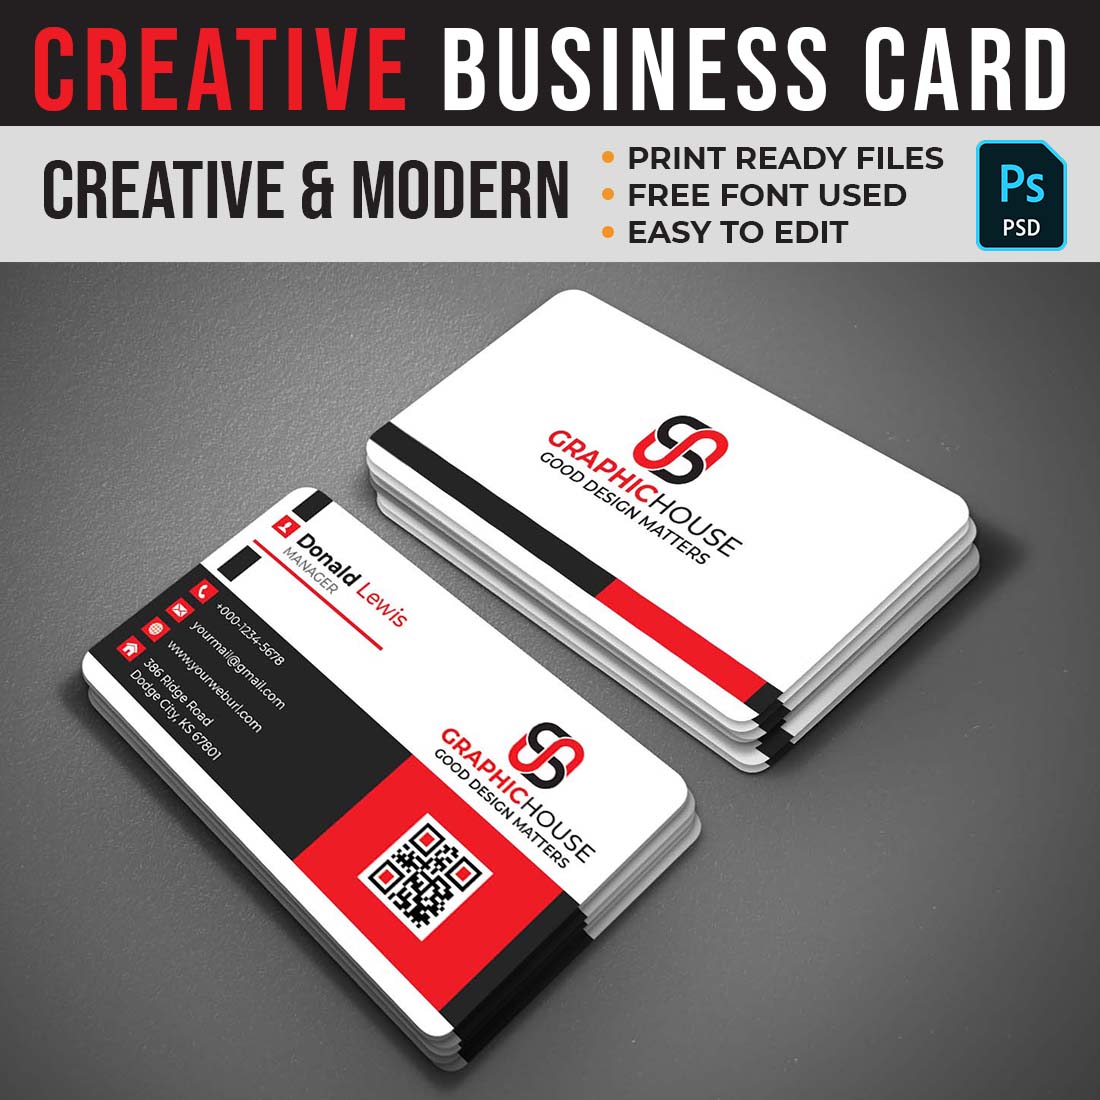 Stylish And Professional Business Card Template Cover Image.